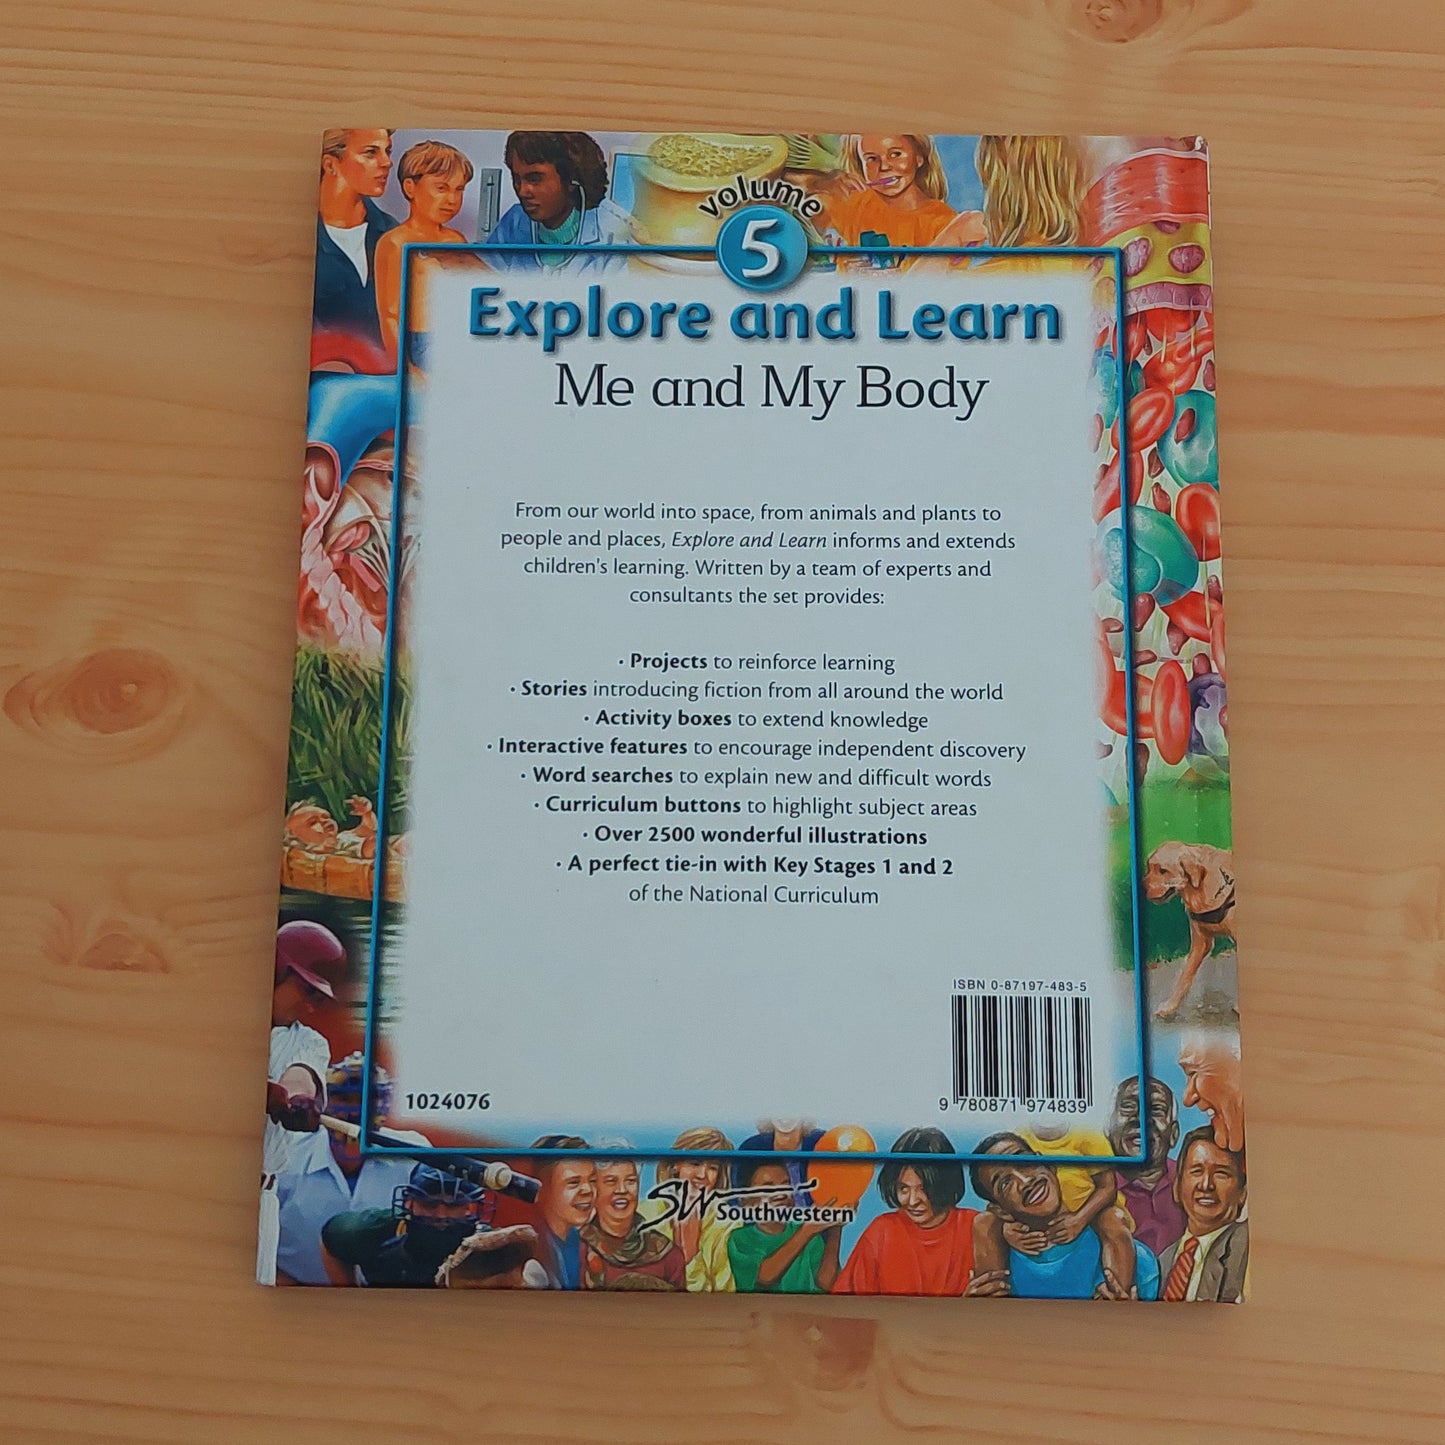 Explore and Learn #2 Science and Technology